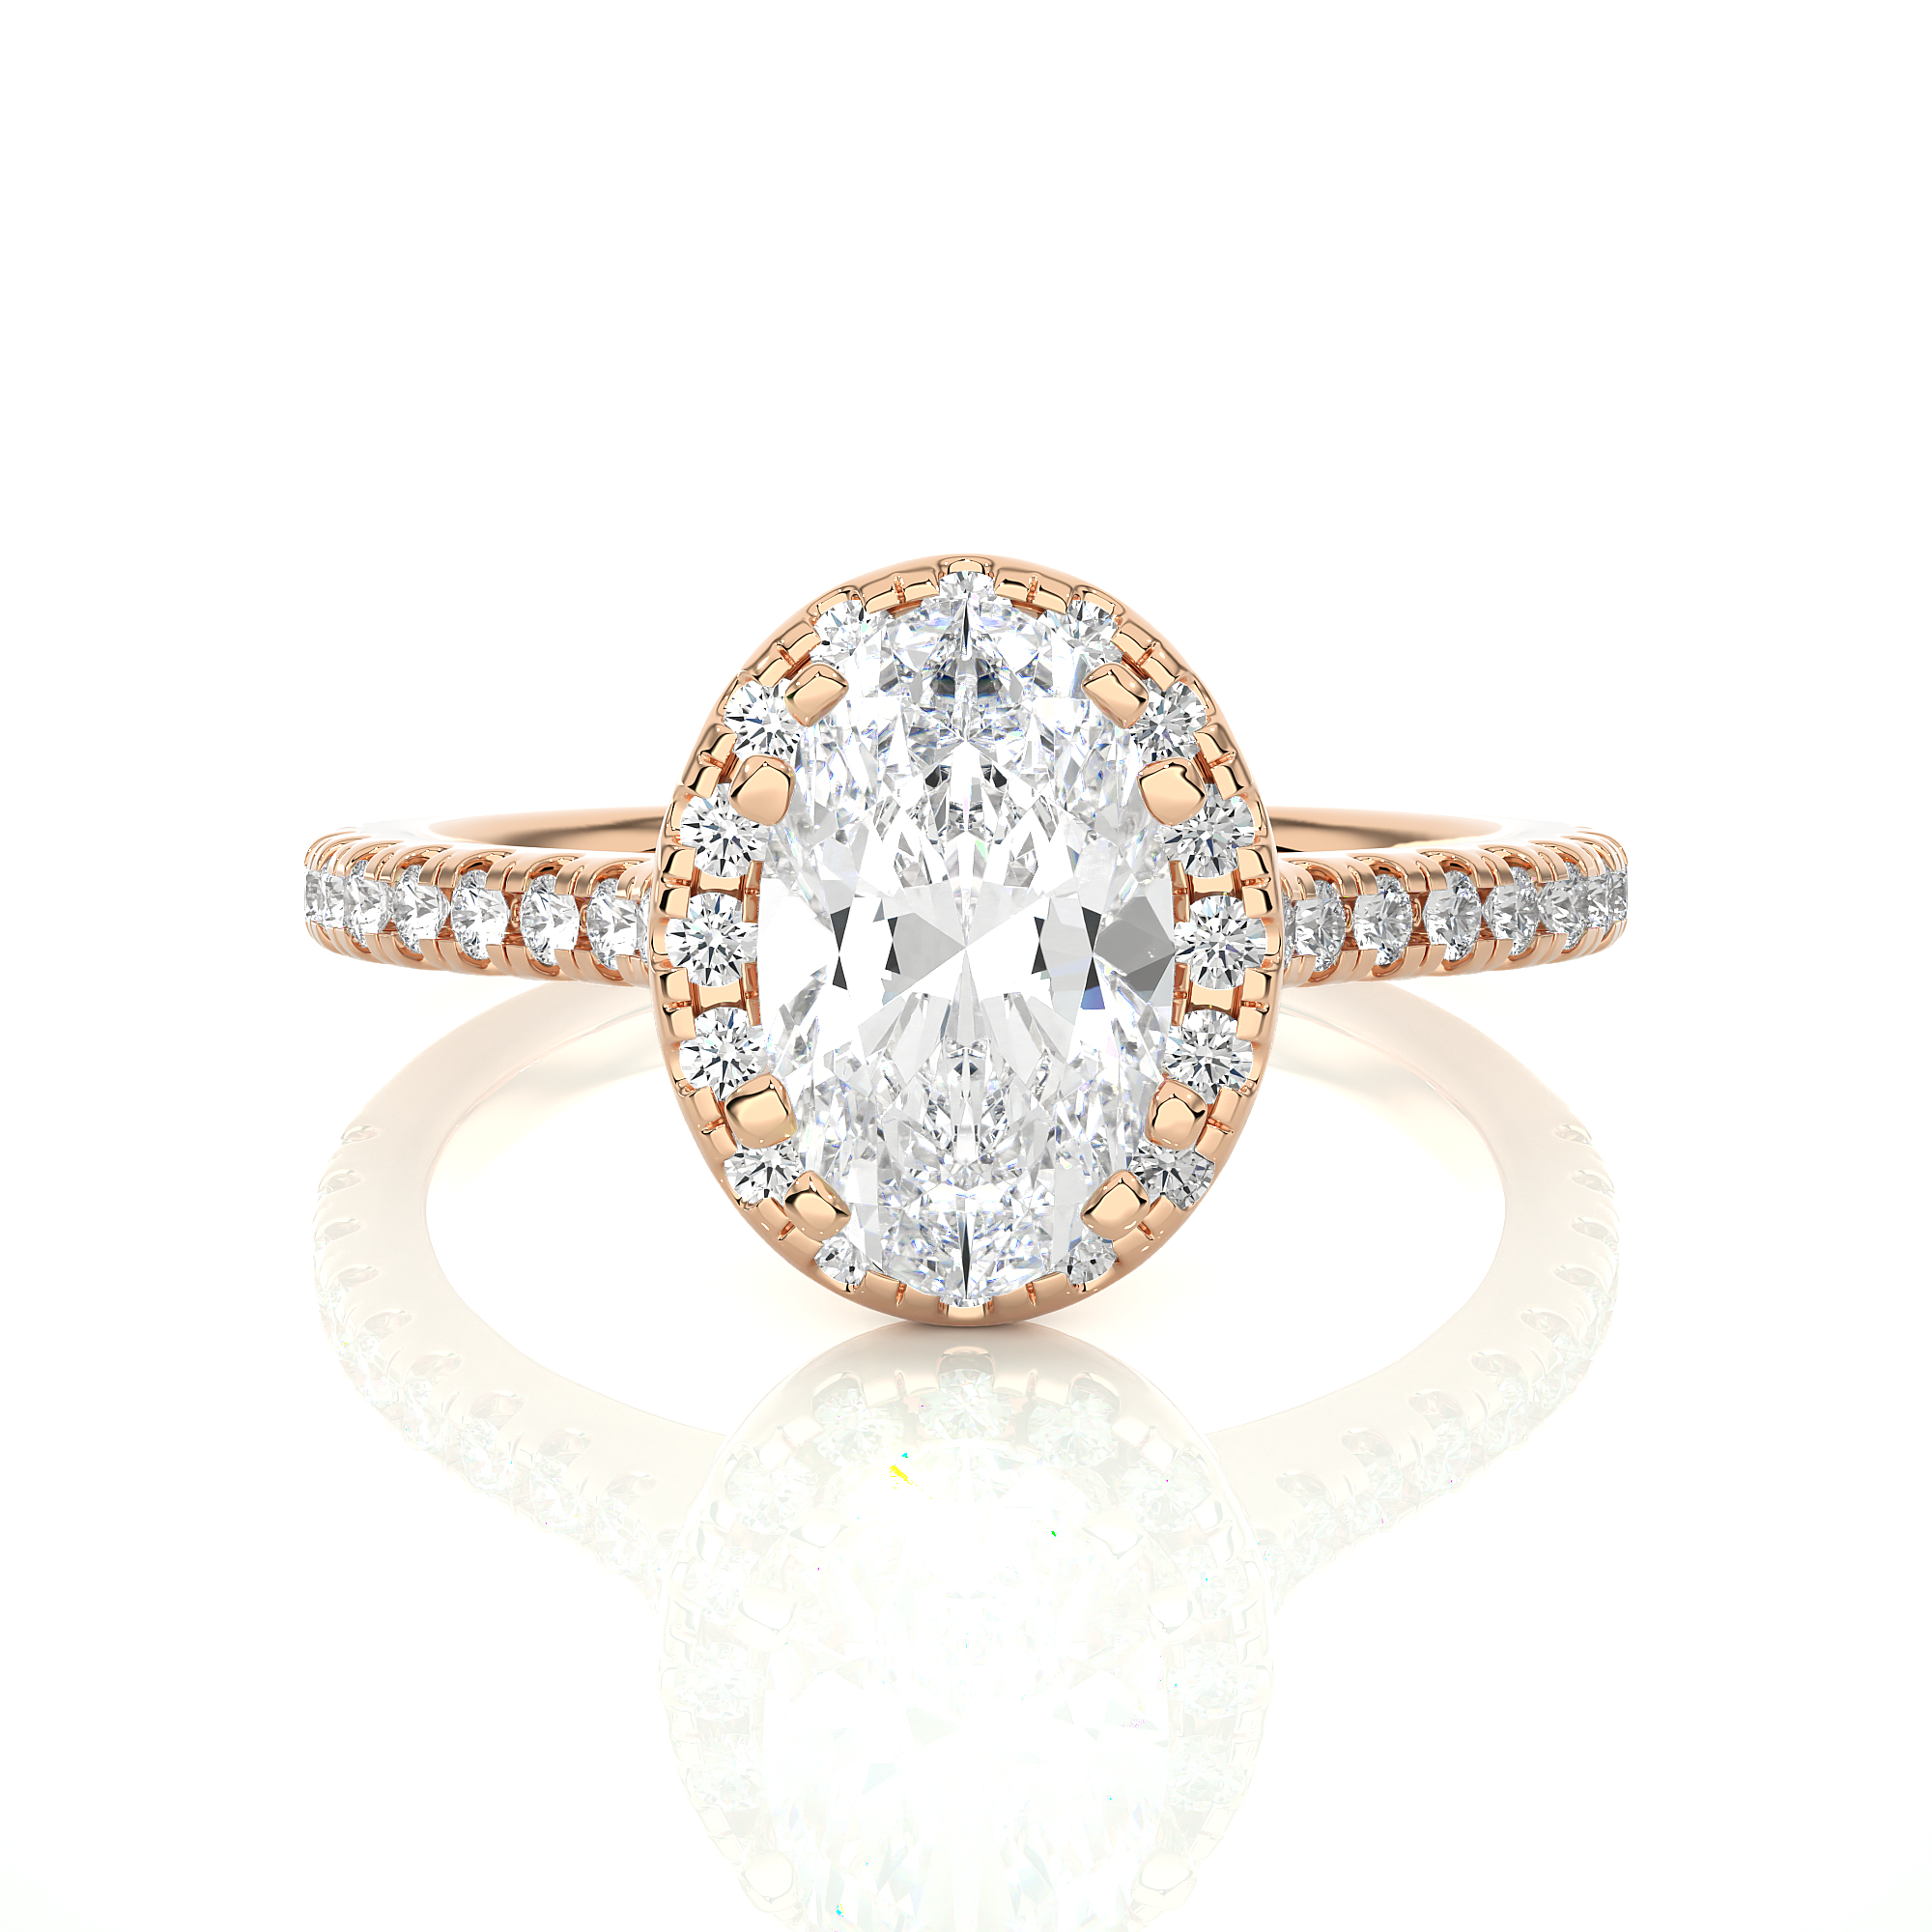 1.49Ct Oval Shaped Solitaire Diamond Ring in 14Kt Rose Gold - Blu Diamonds